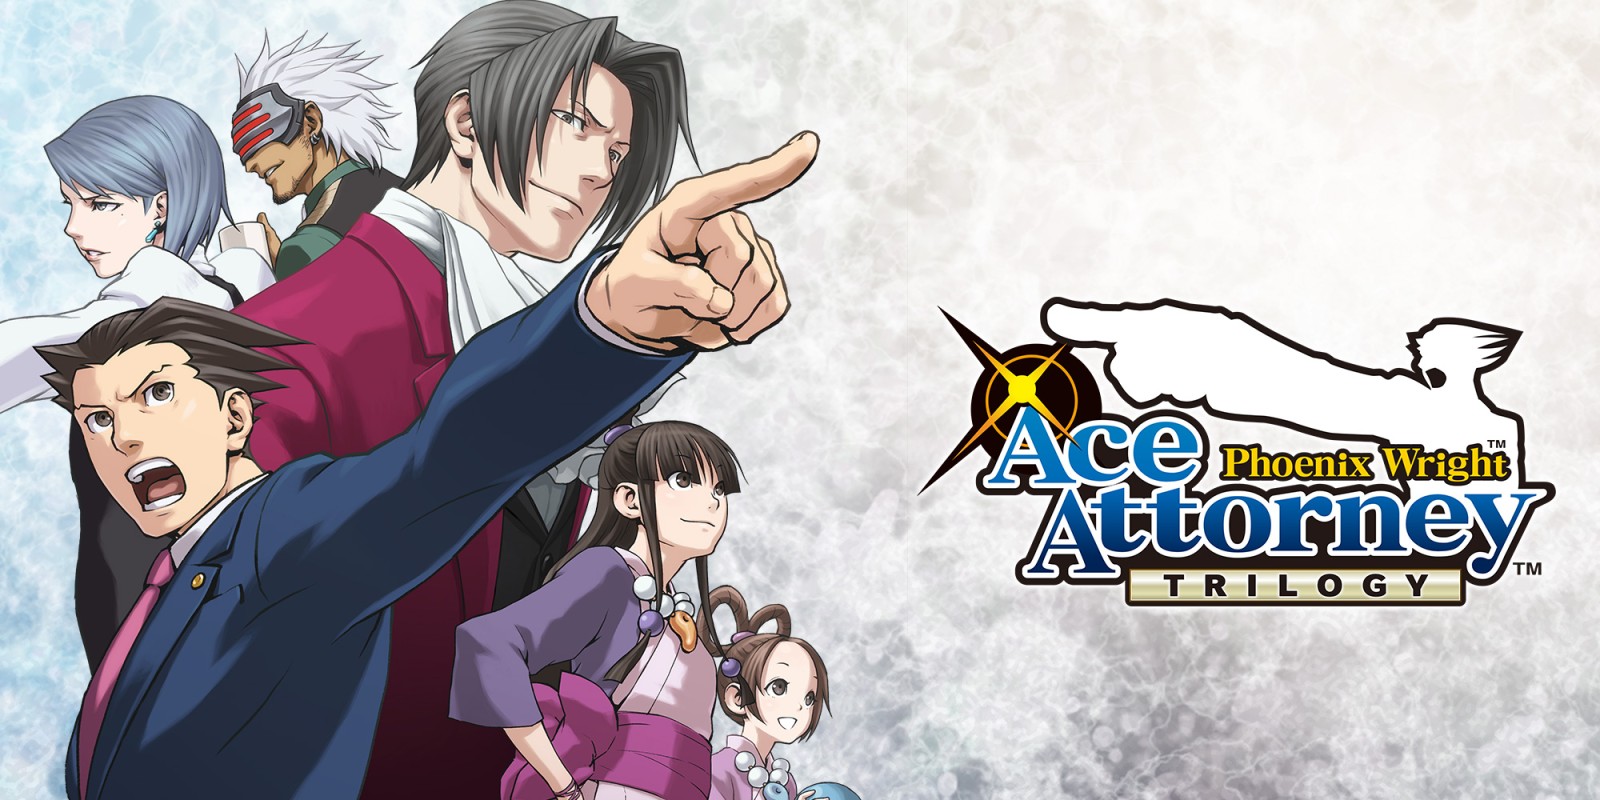 Phoenix Wright: Ace Attorney Trilogy for Switch is digital-only in the west